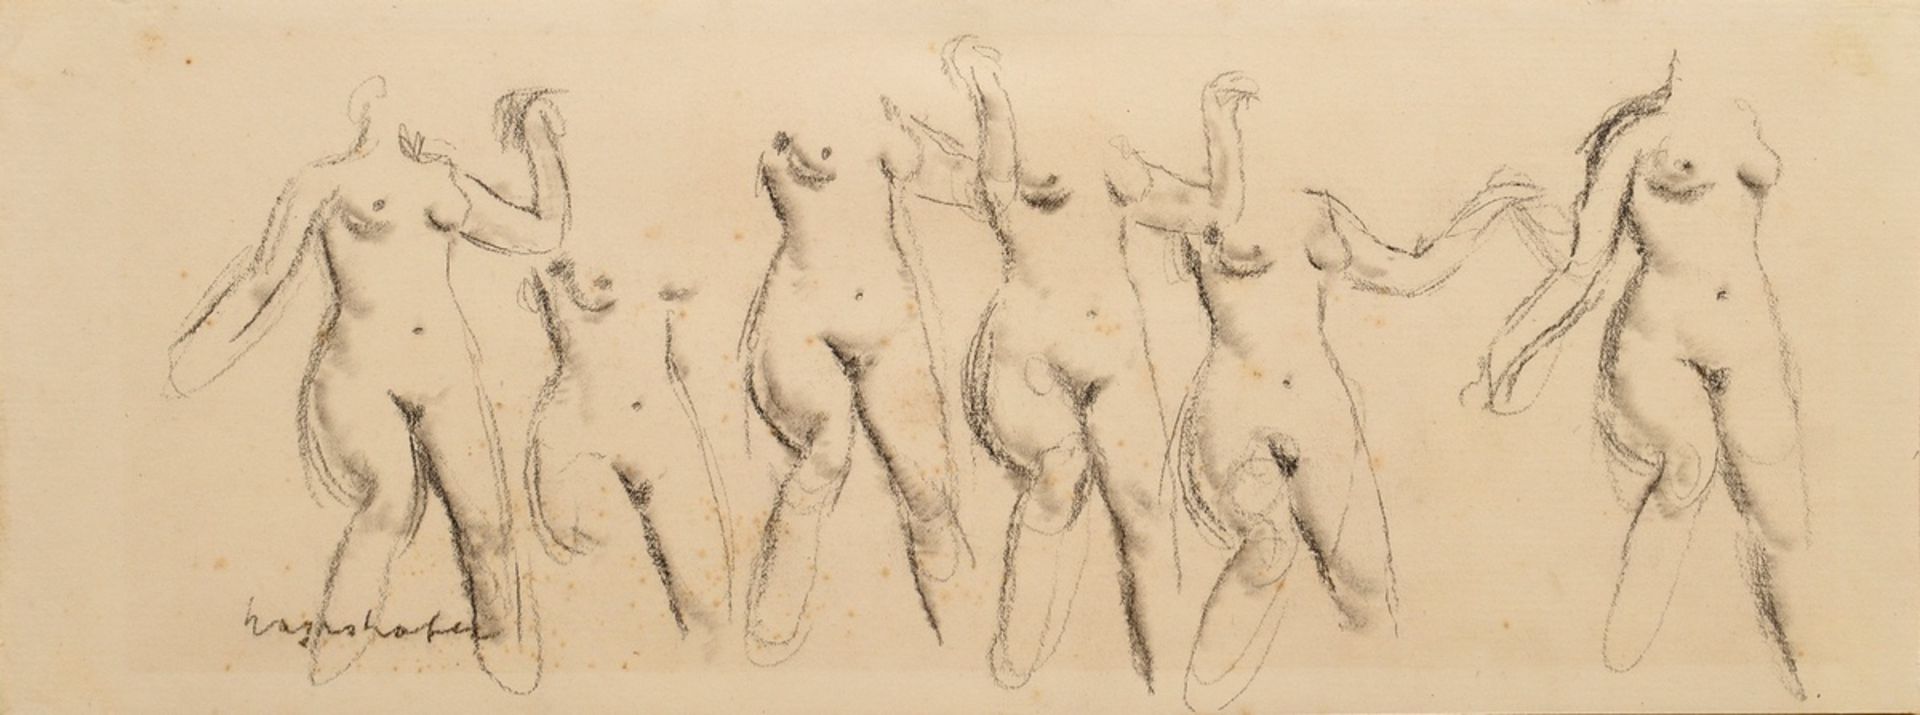 17 Mayershofer, Max (1875-1950) "Female nude drawings", charcoal, each sign., each mounted in passe - Image 8 of 19